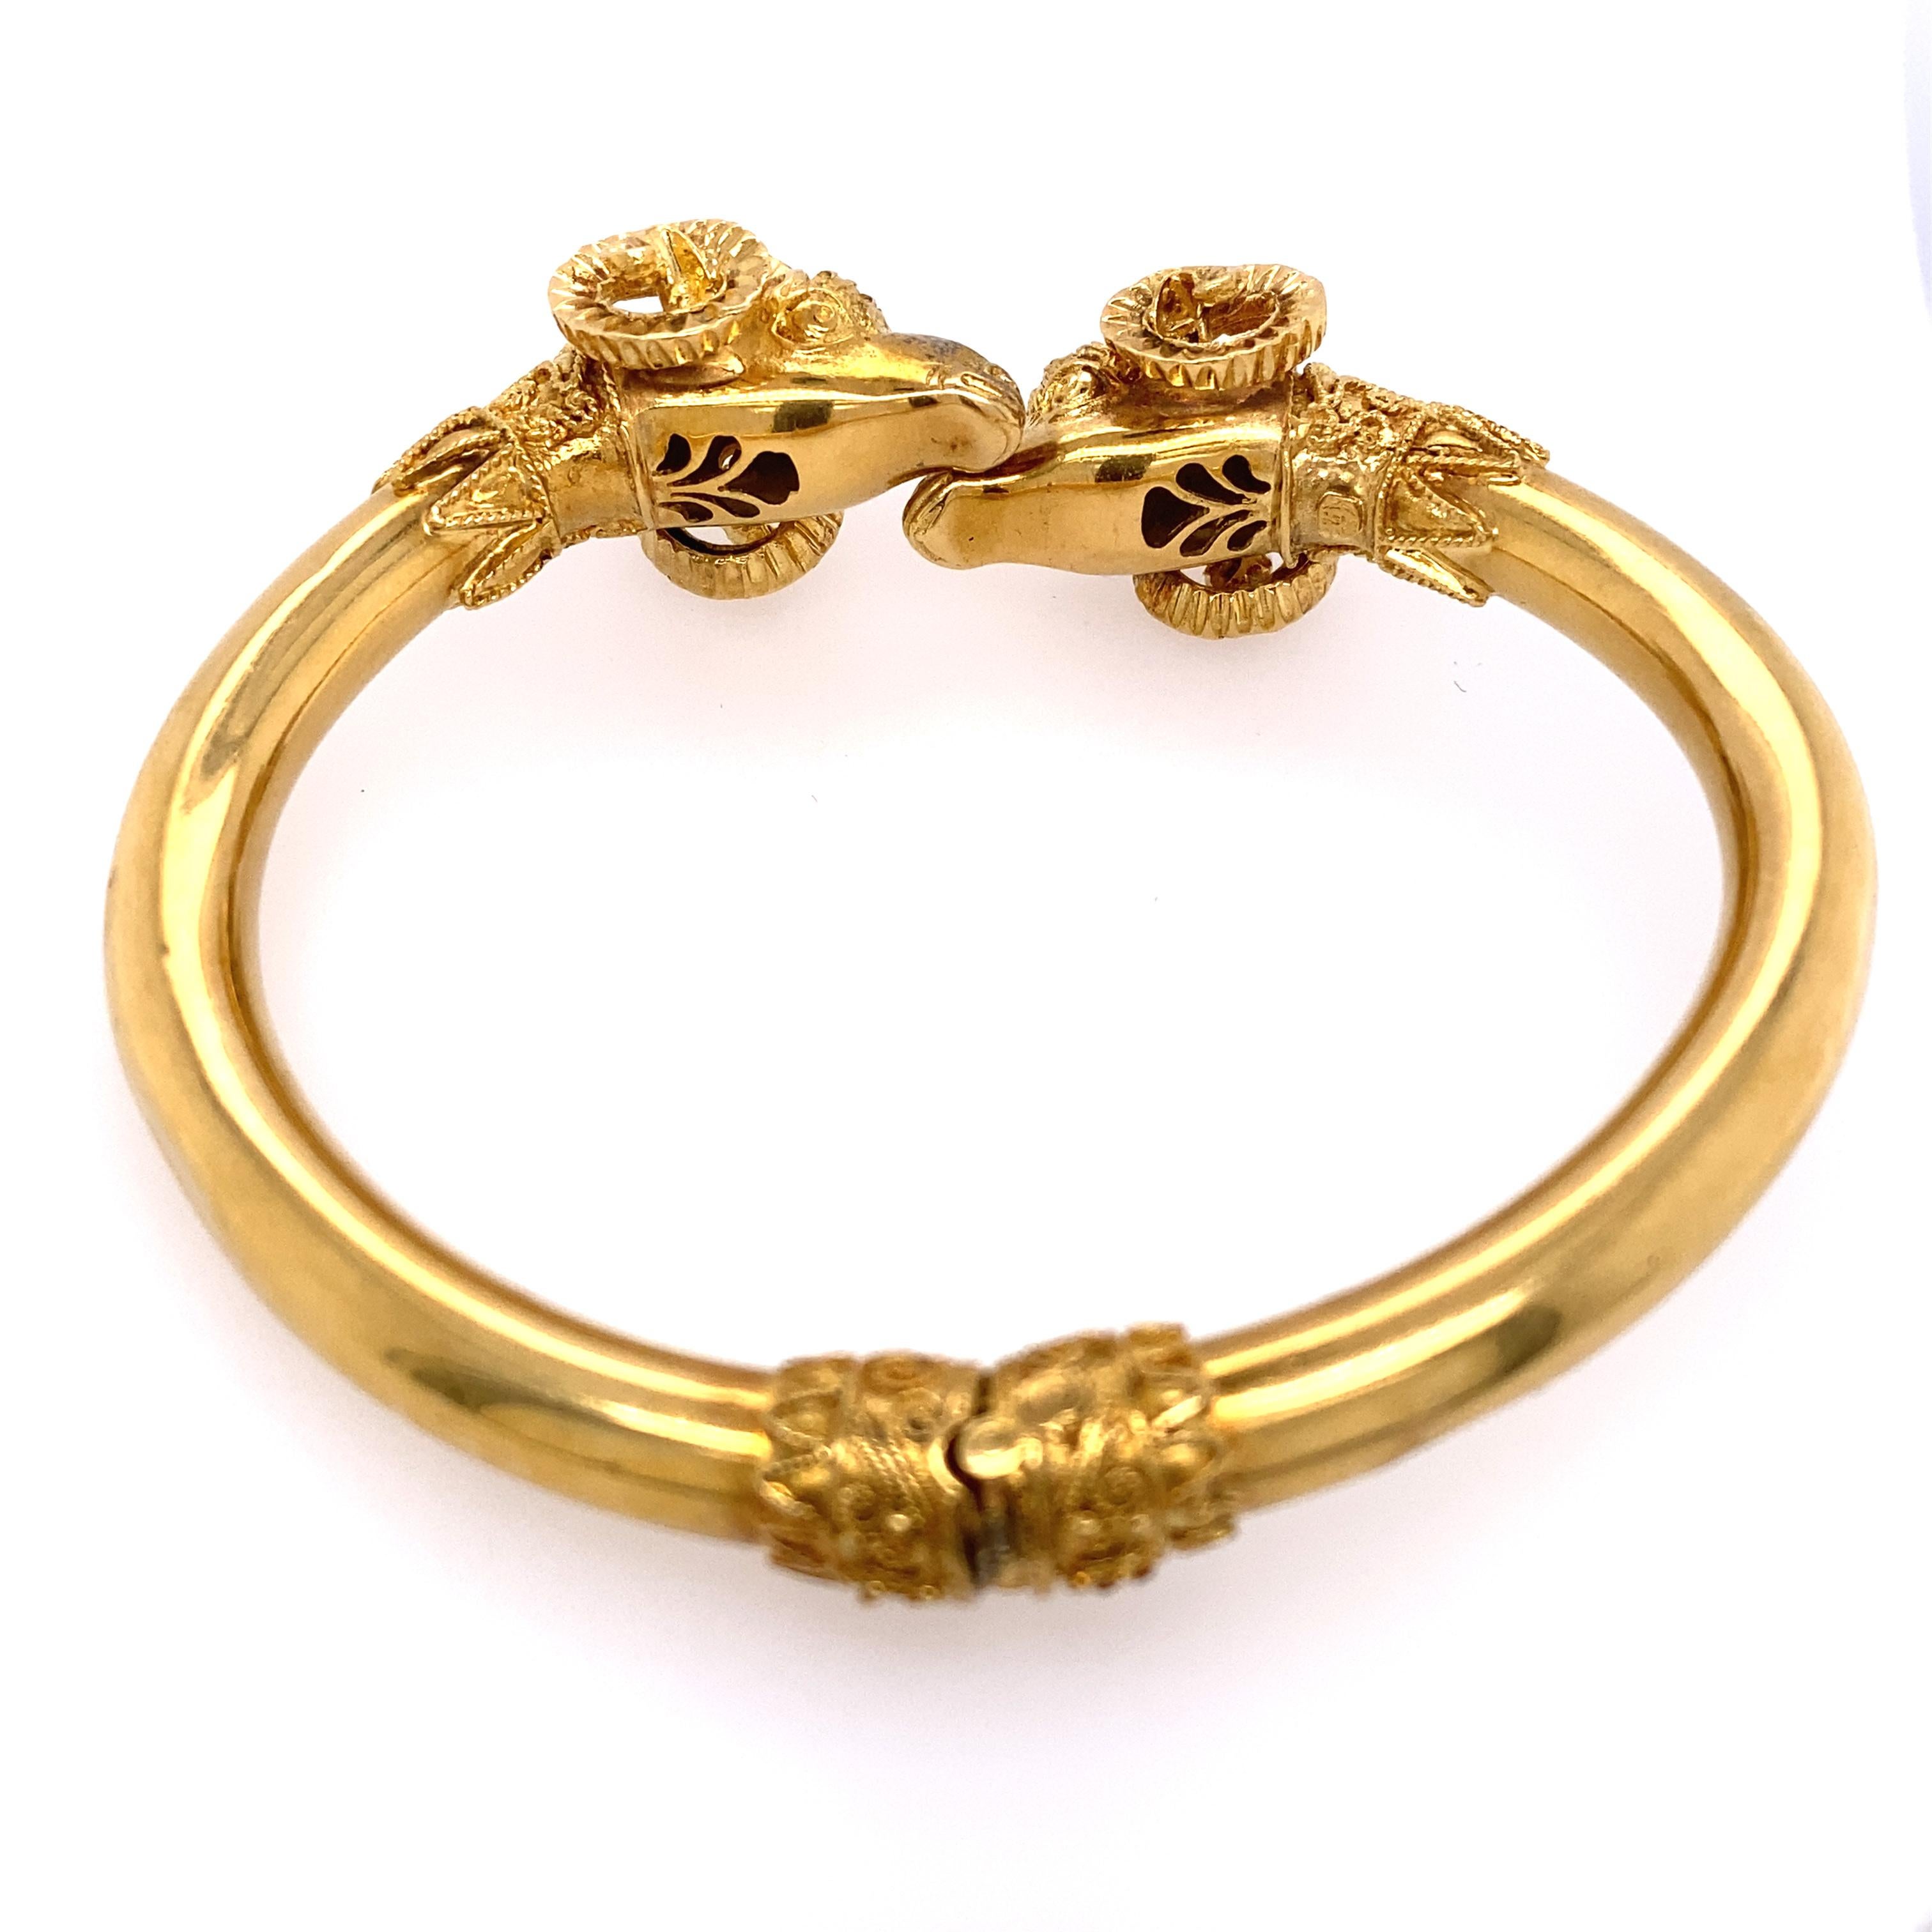 18k Gold Double Ram Head Bangle 
Most likely Lalaounis or Zolatas, not signed. 
Total weight 30.6 dwt. Bracelet is flexible and will fit size 6 inches - 8 inches.